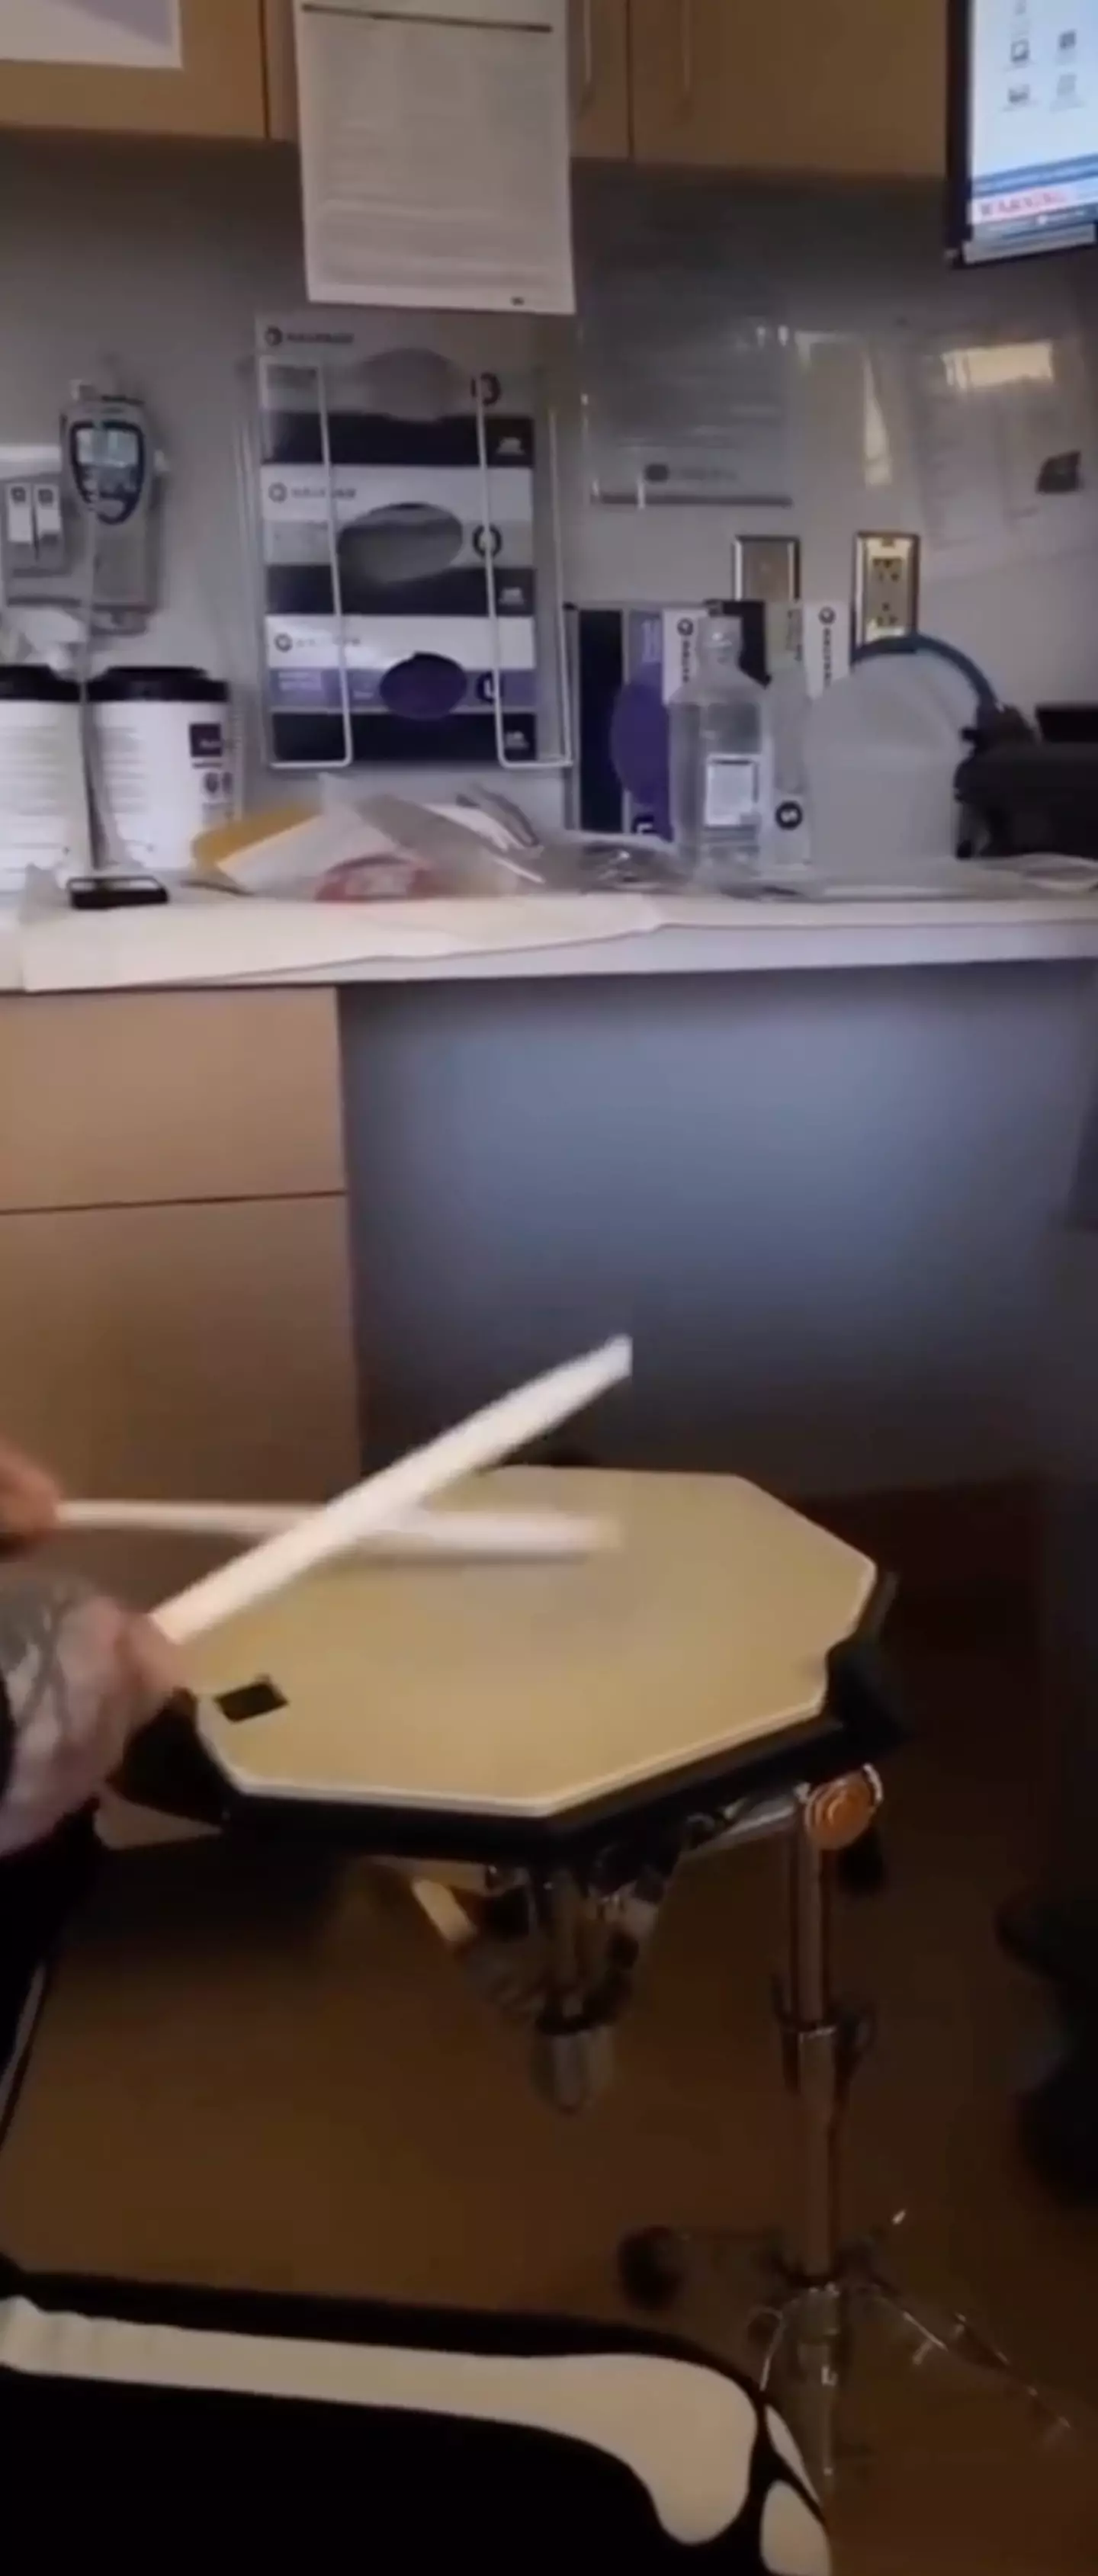 The video shows Travis drumming on a snare drum pad in a doctor's office.